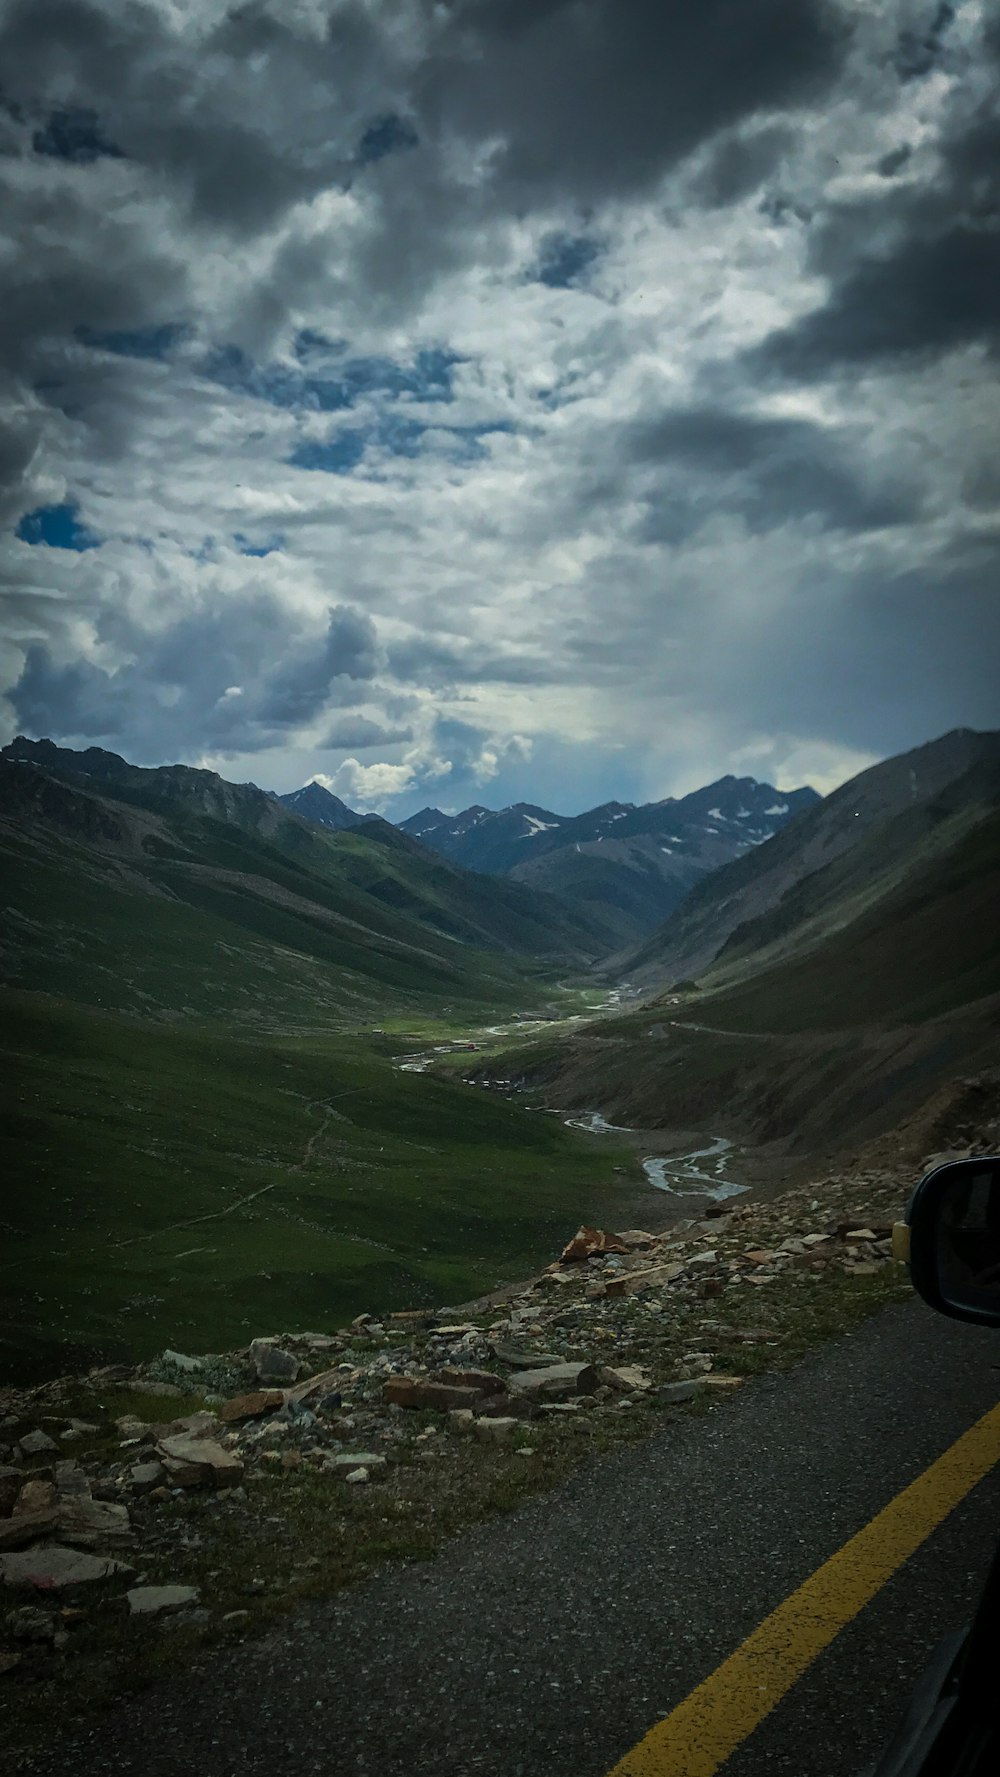 a scenic view of a valley and mountains under a cloudy sky